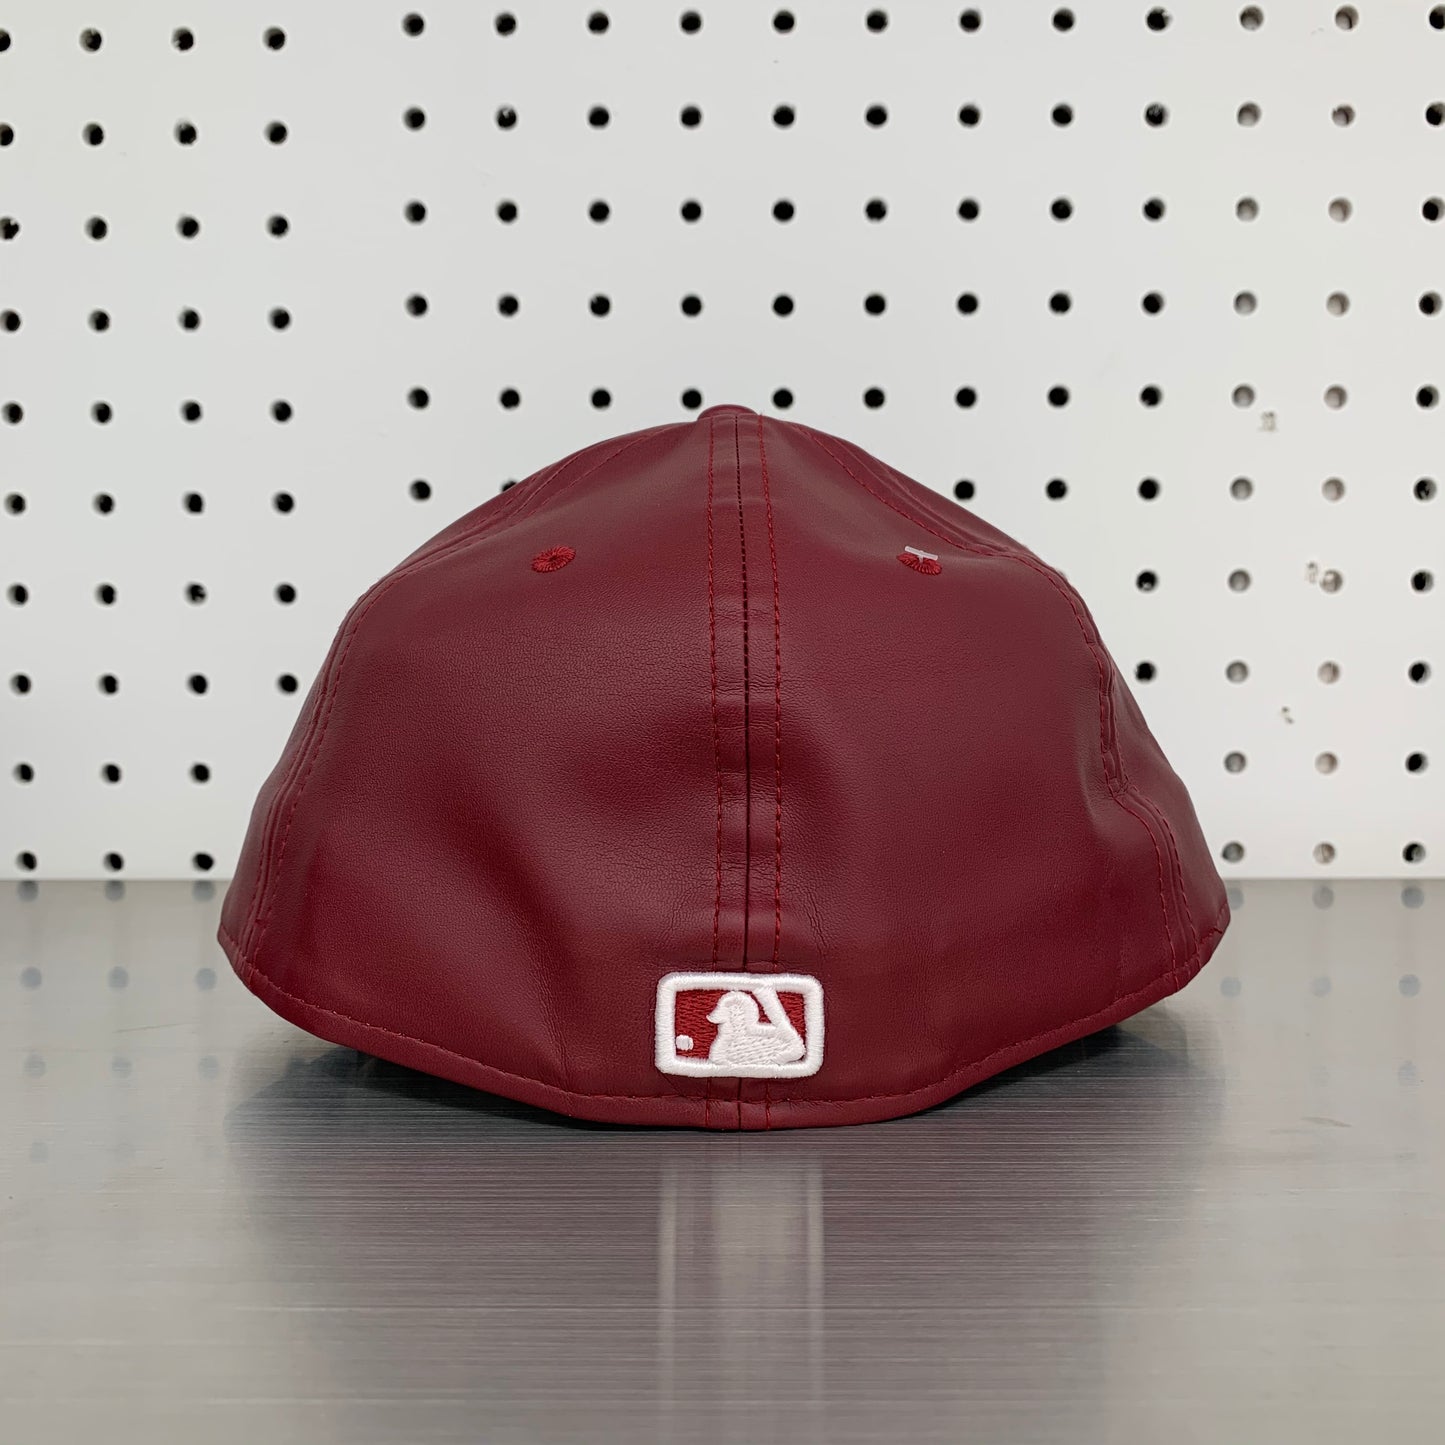 New York Yankees New Era 59FIFTY Fitted Cap "Burgundy Leather"